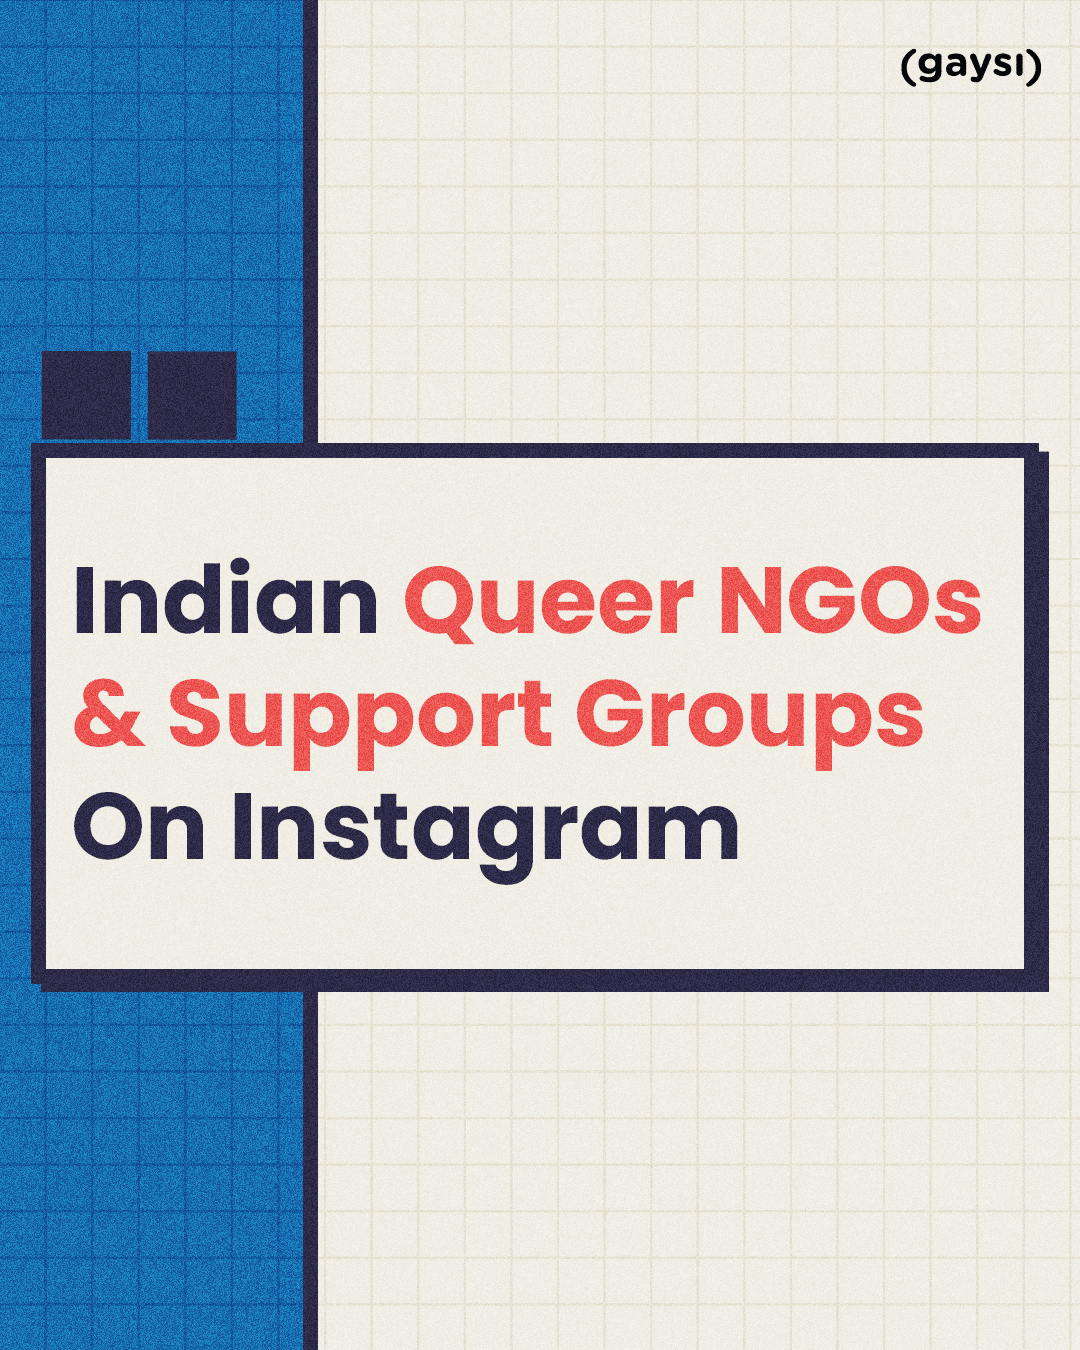 Indian Queer NGOs & Support Groups On Instagram